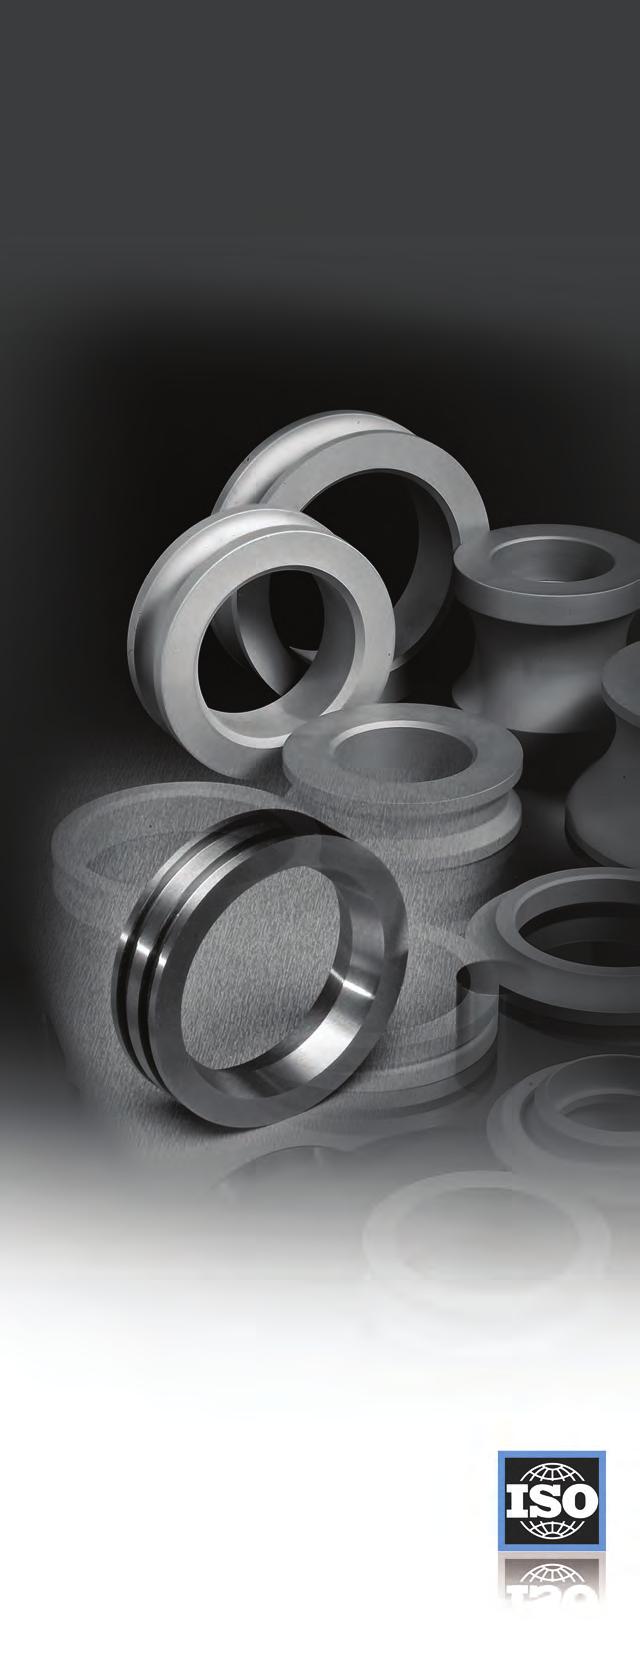 DESIGNING FOR CARBIDE Solutions for industry specific requirements Cemented carbide is a unique blend of fine grain tungsten carbide powder and a small amount of binder material, usually cobalt, also